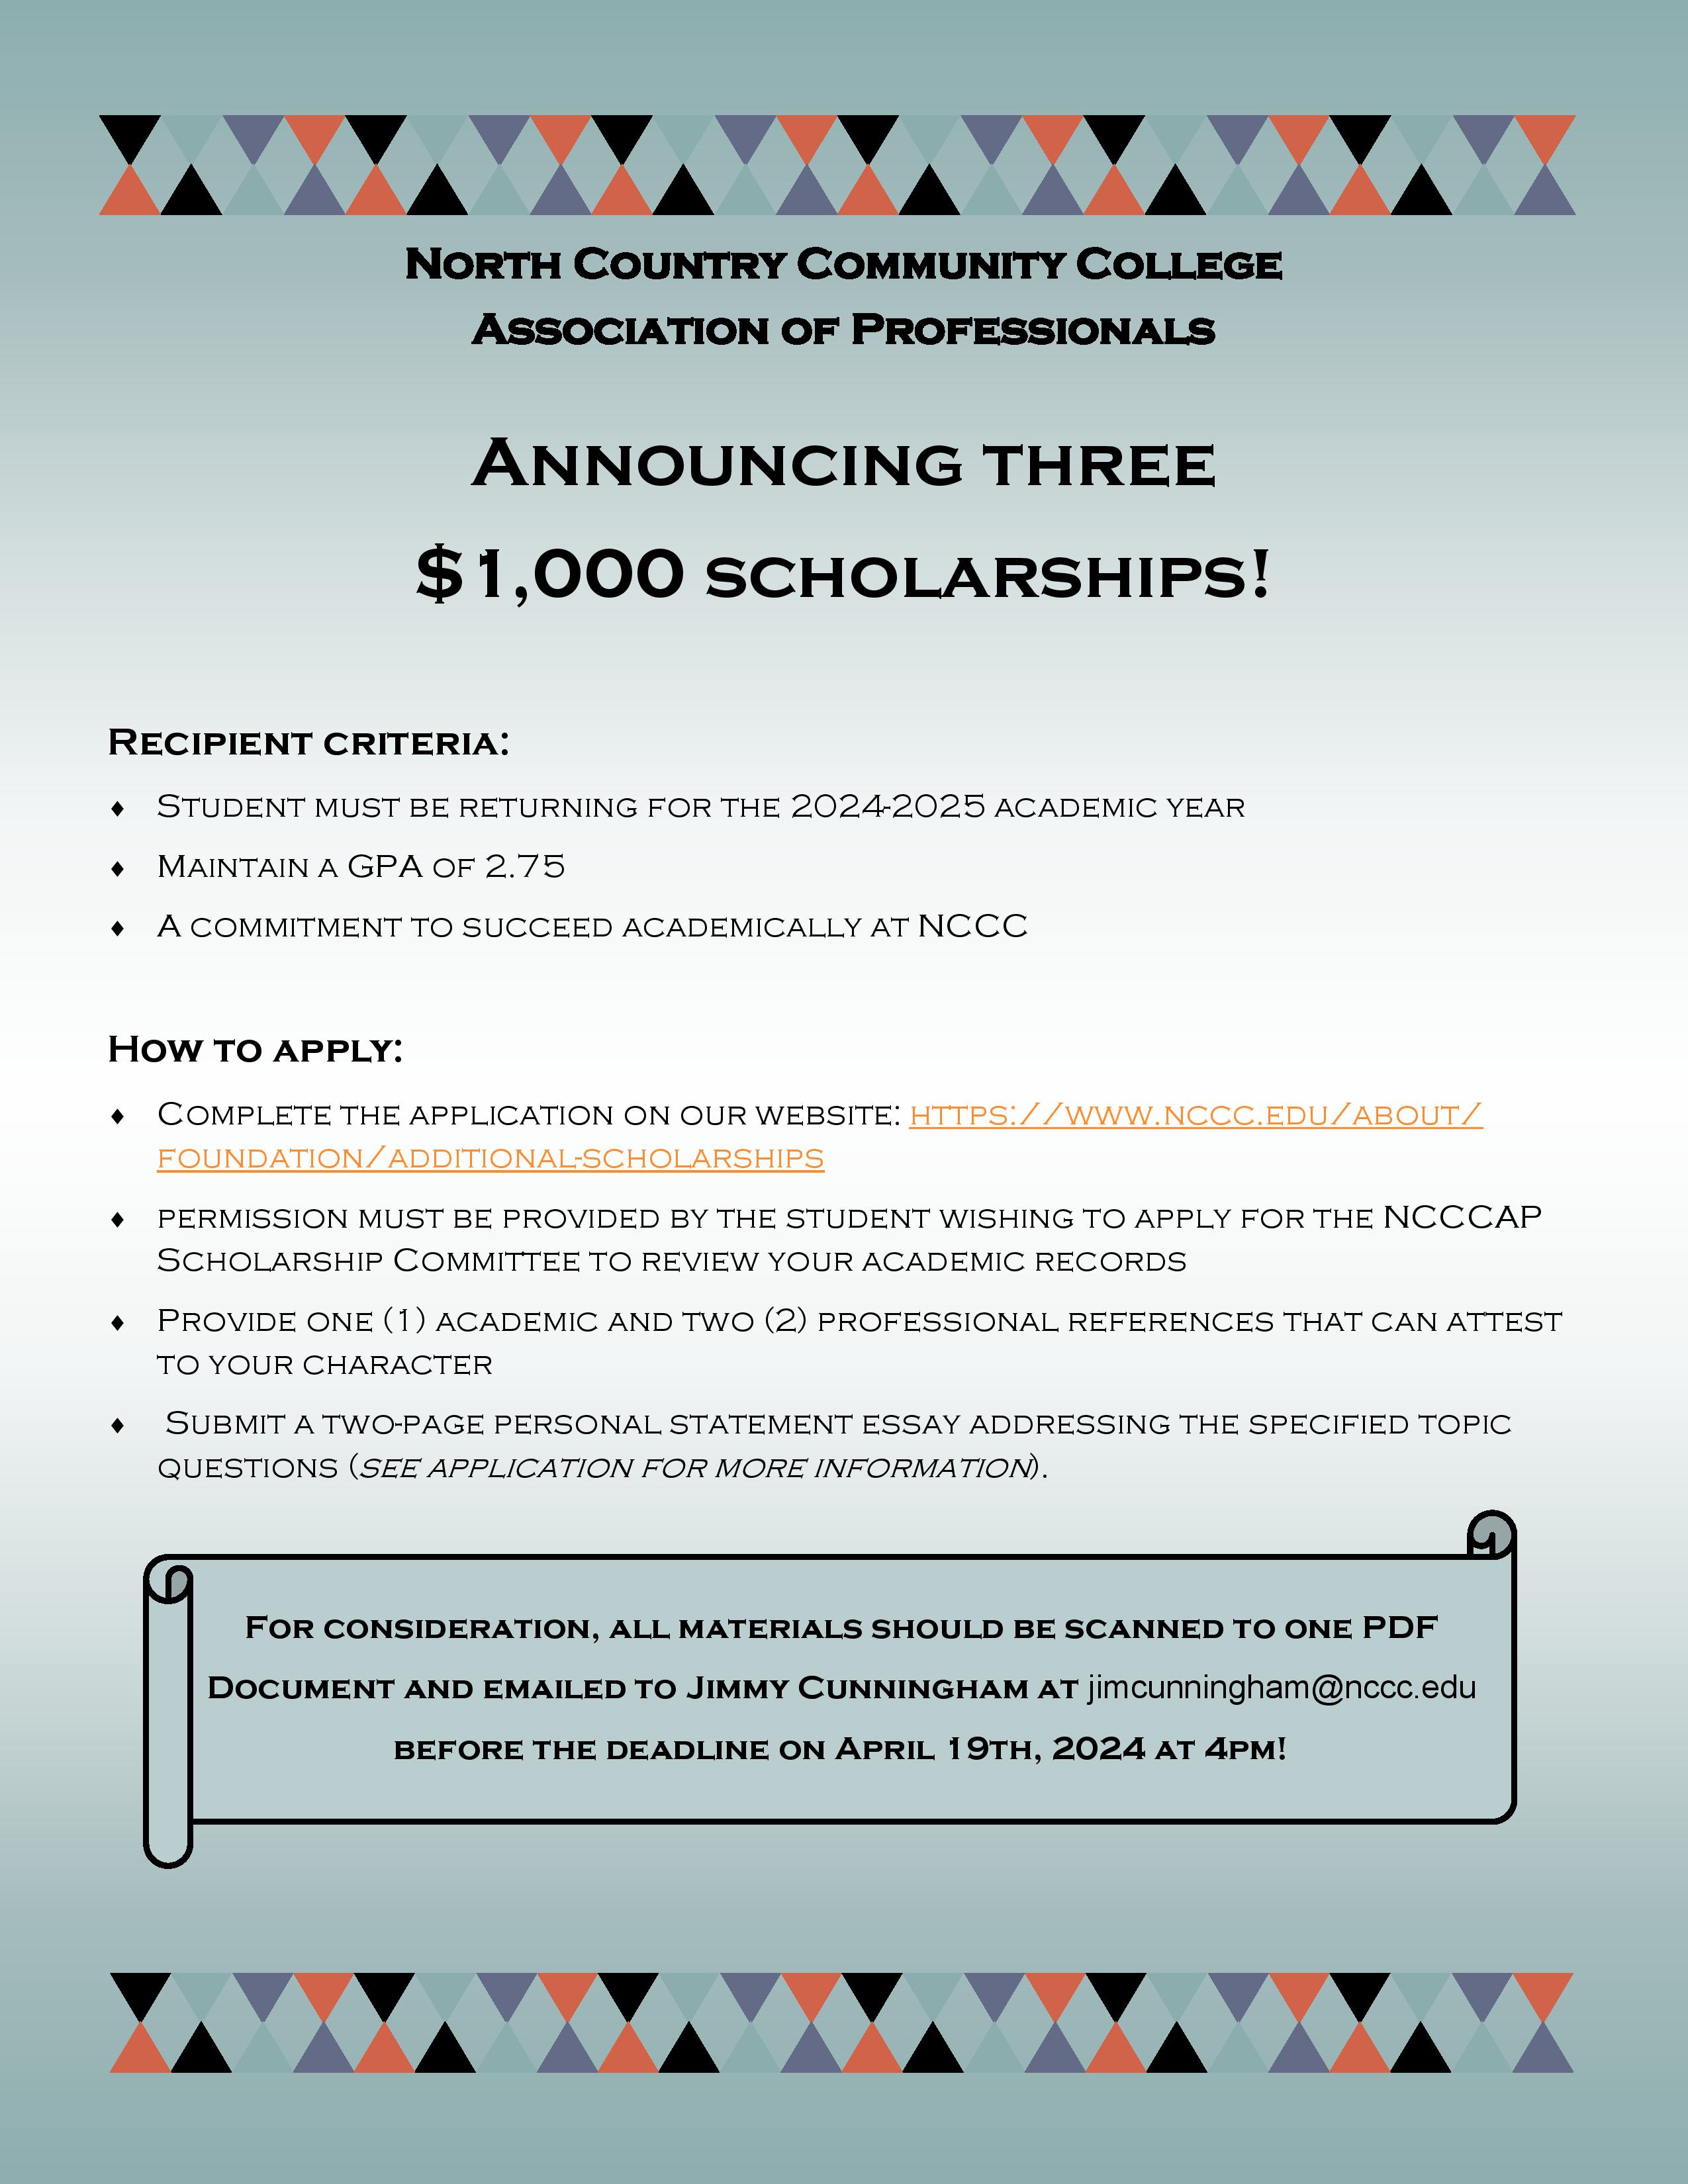 A flyer describing the NCCCAP scholarships available to students.